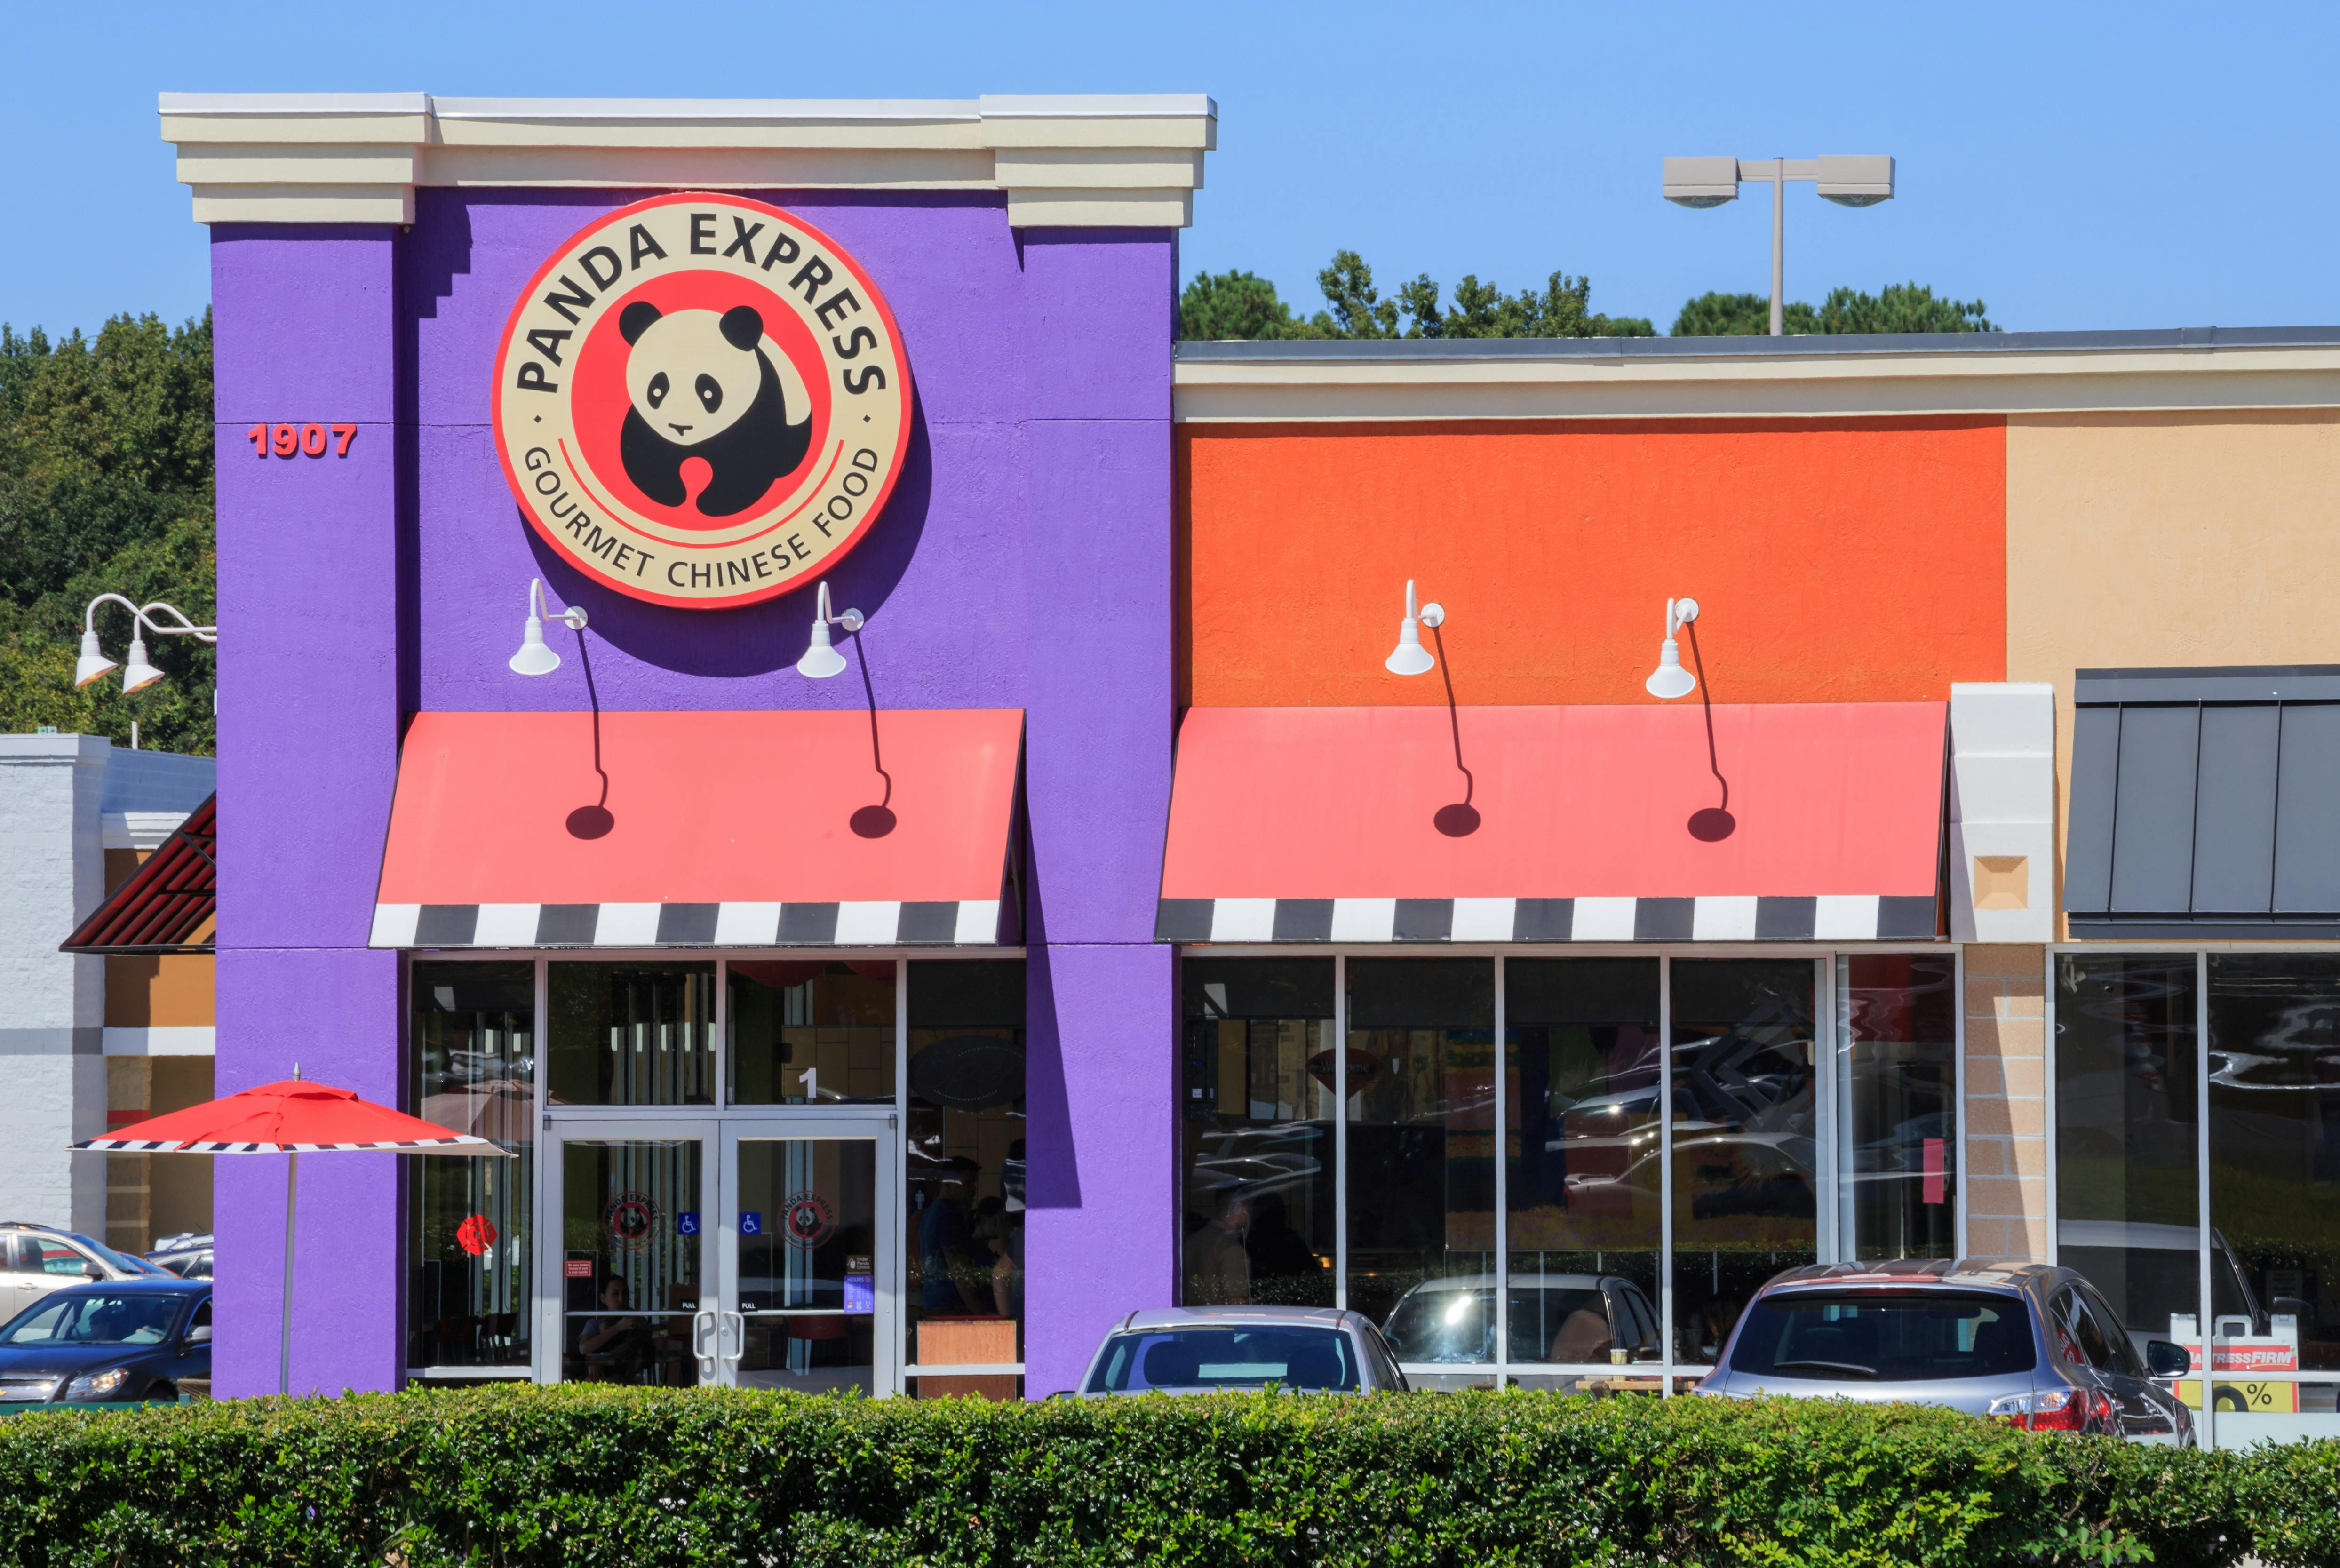 The front of a Panda Express restaurant